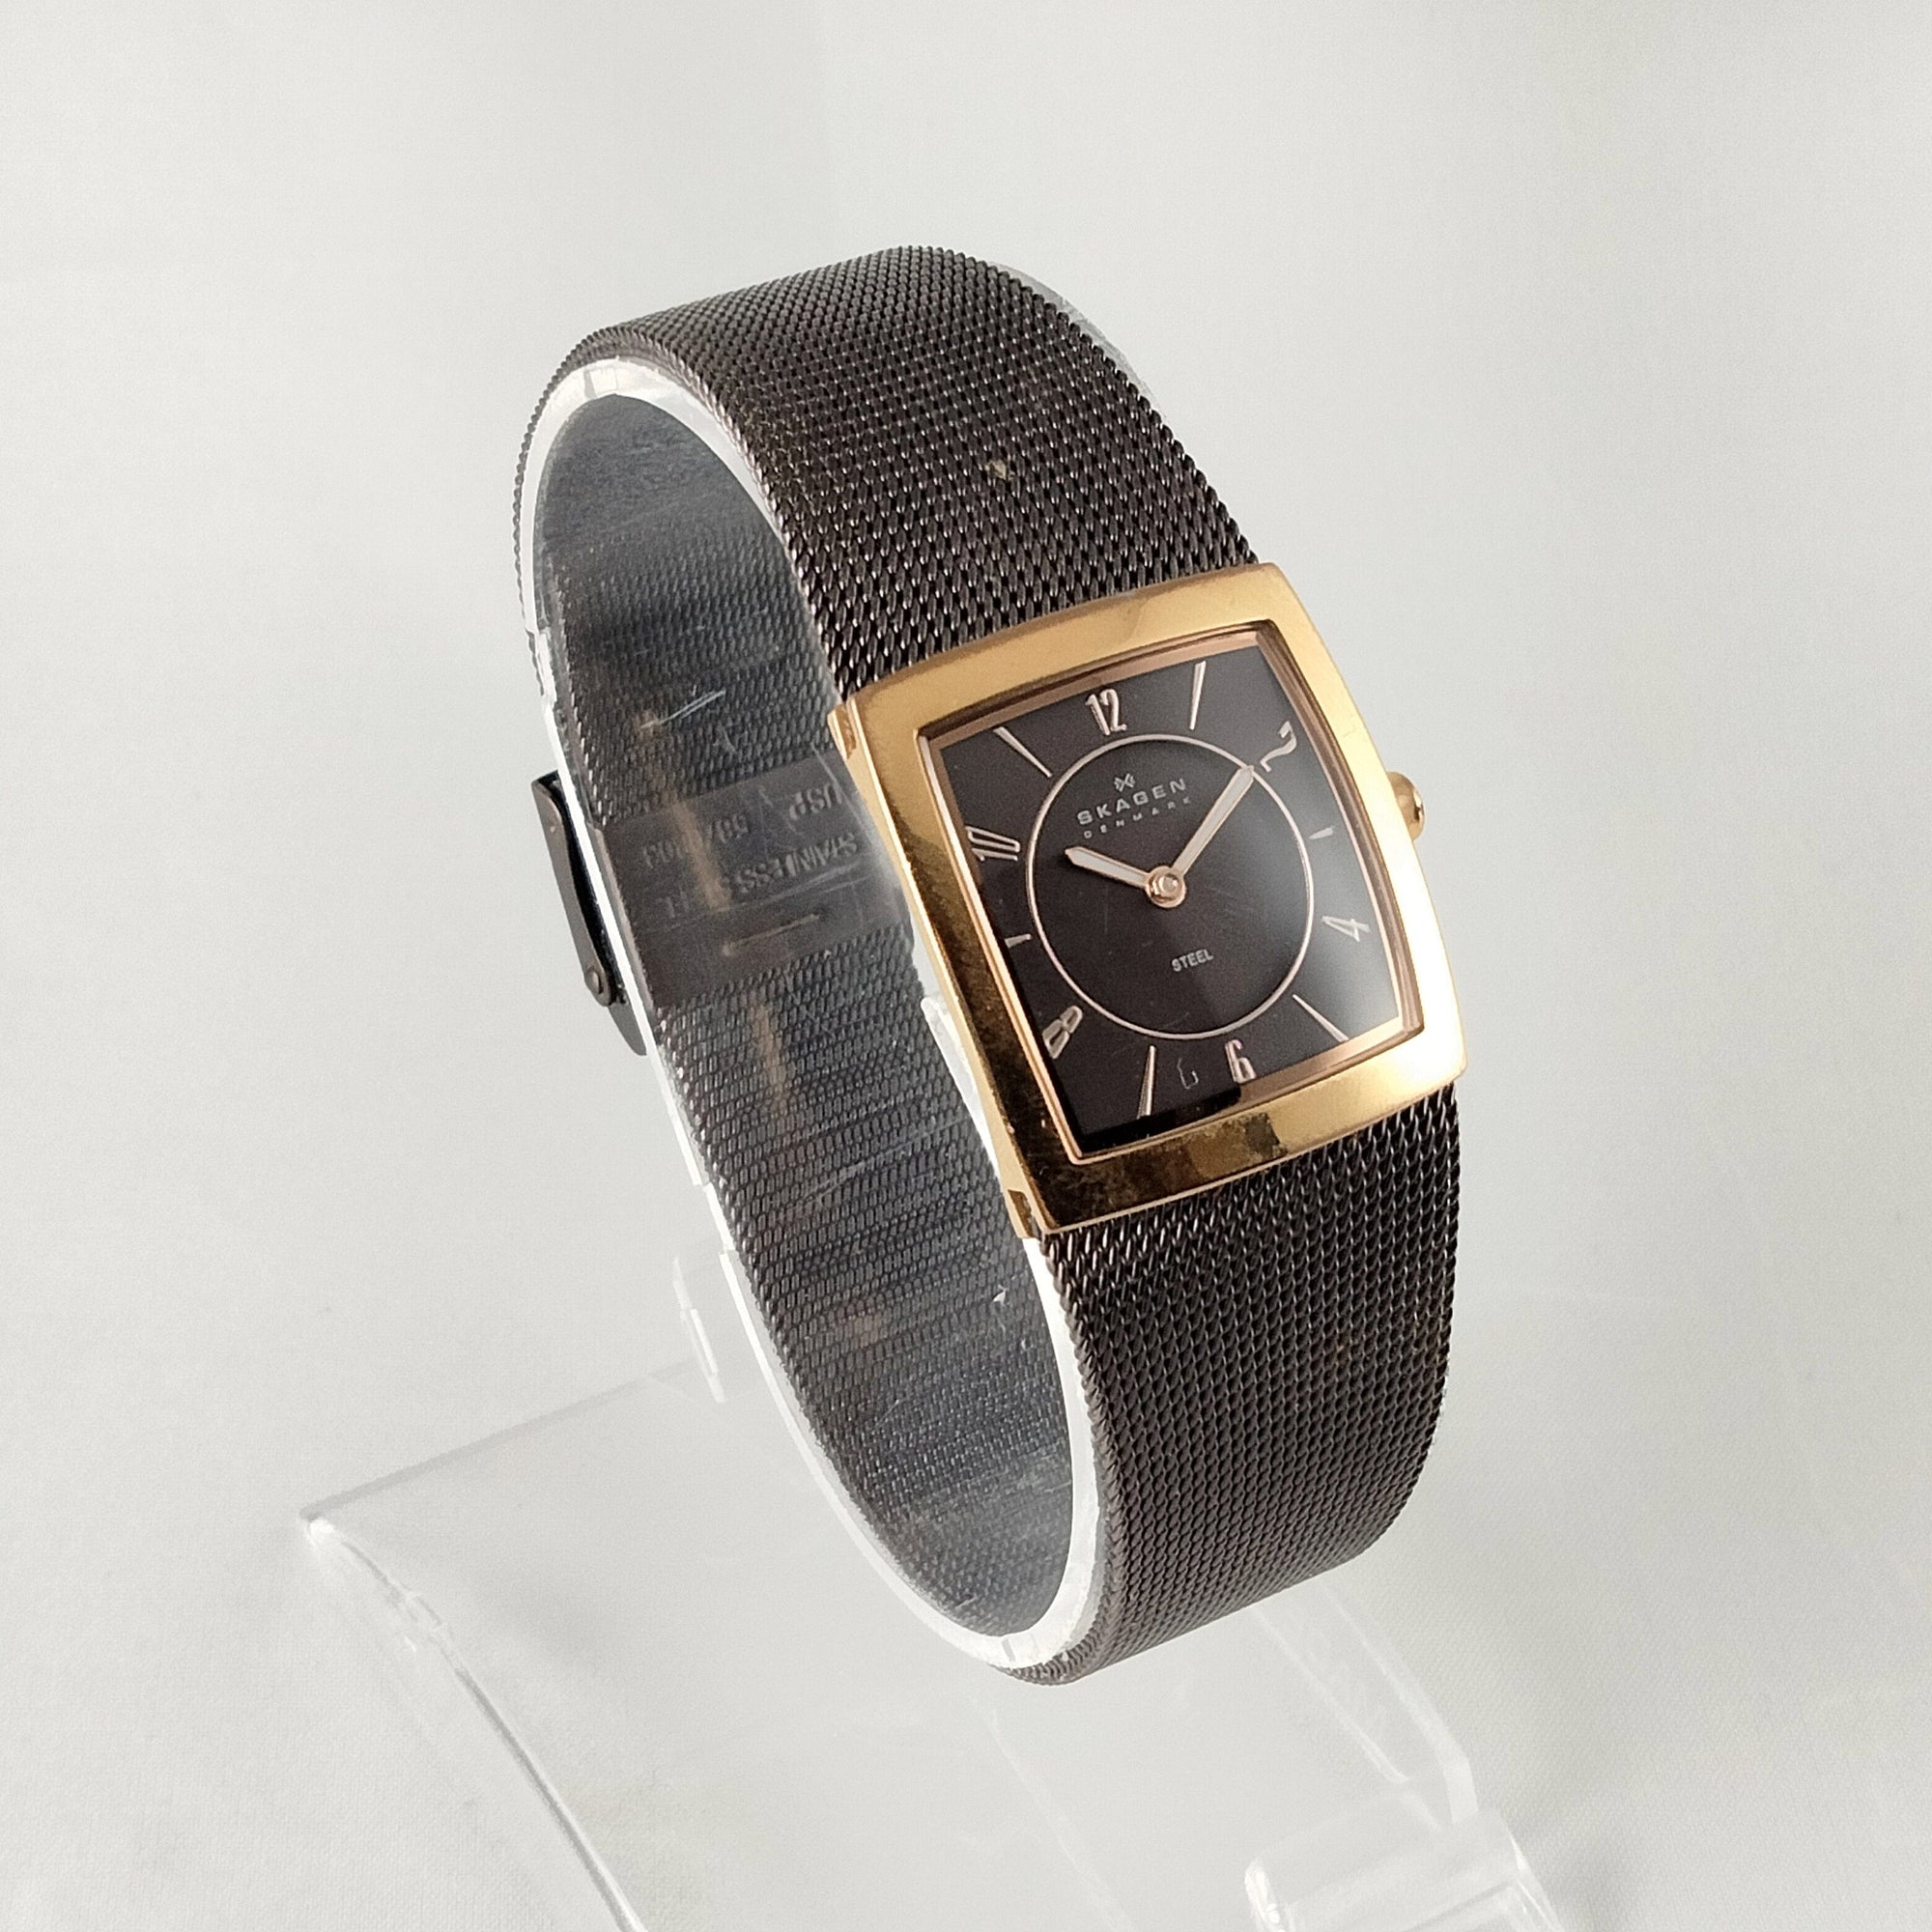 I Like Mikes Mid Century Modern Watches Skagen Unisex Stainless Steel Square Watch, Dark Brown Dial and Mesh Strap, Gold Tone Details